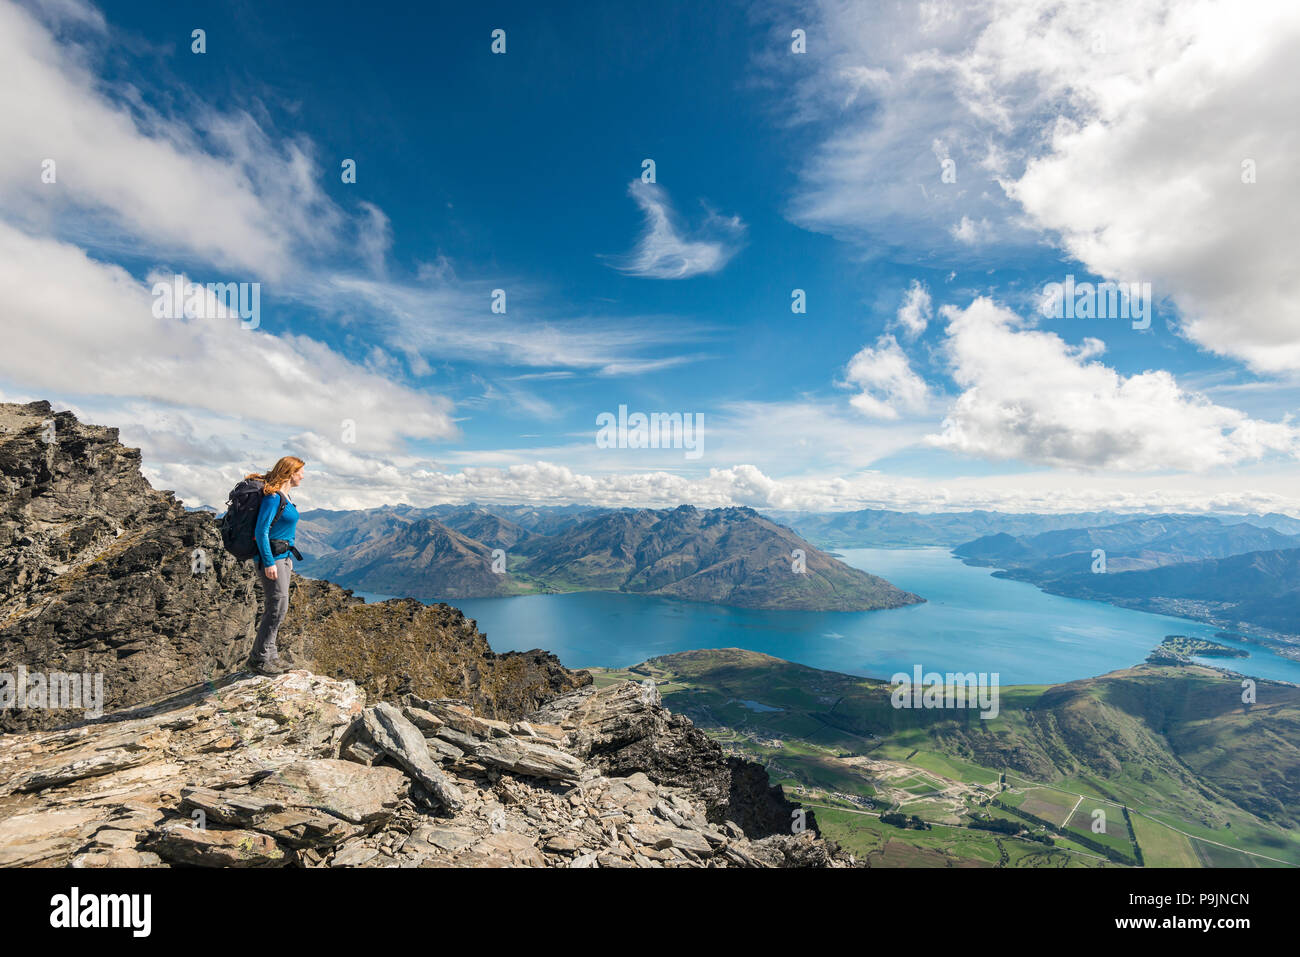 Female hiker stands on rocks in The Remarkables, overlooking Lake Wakatipu, mountains and Queenstown, Queenstown, Otago Stock Photo